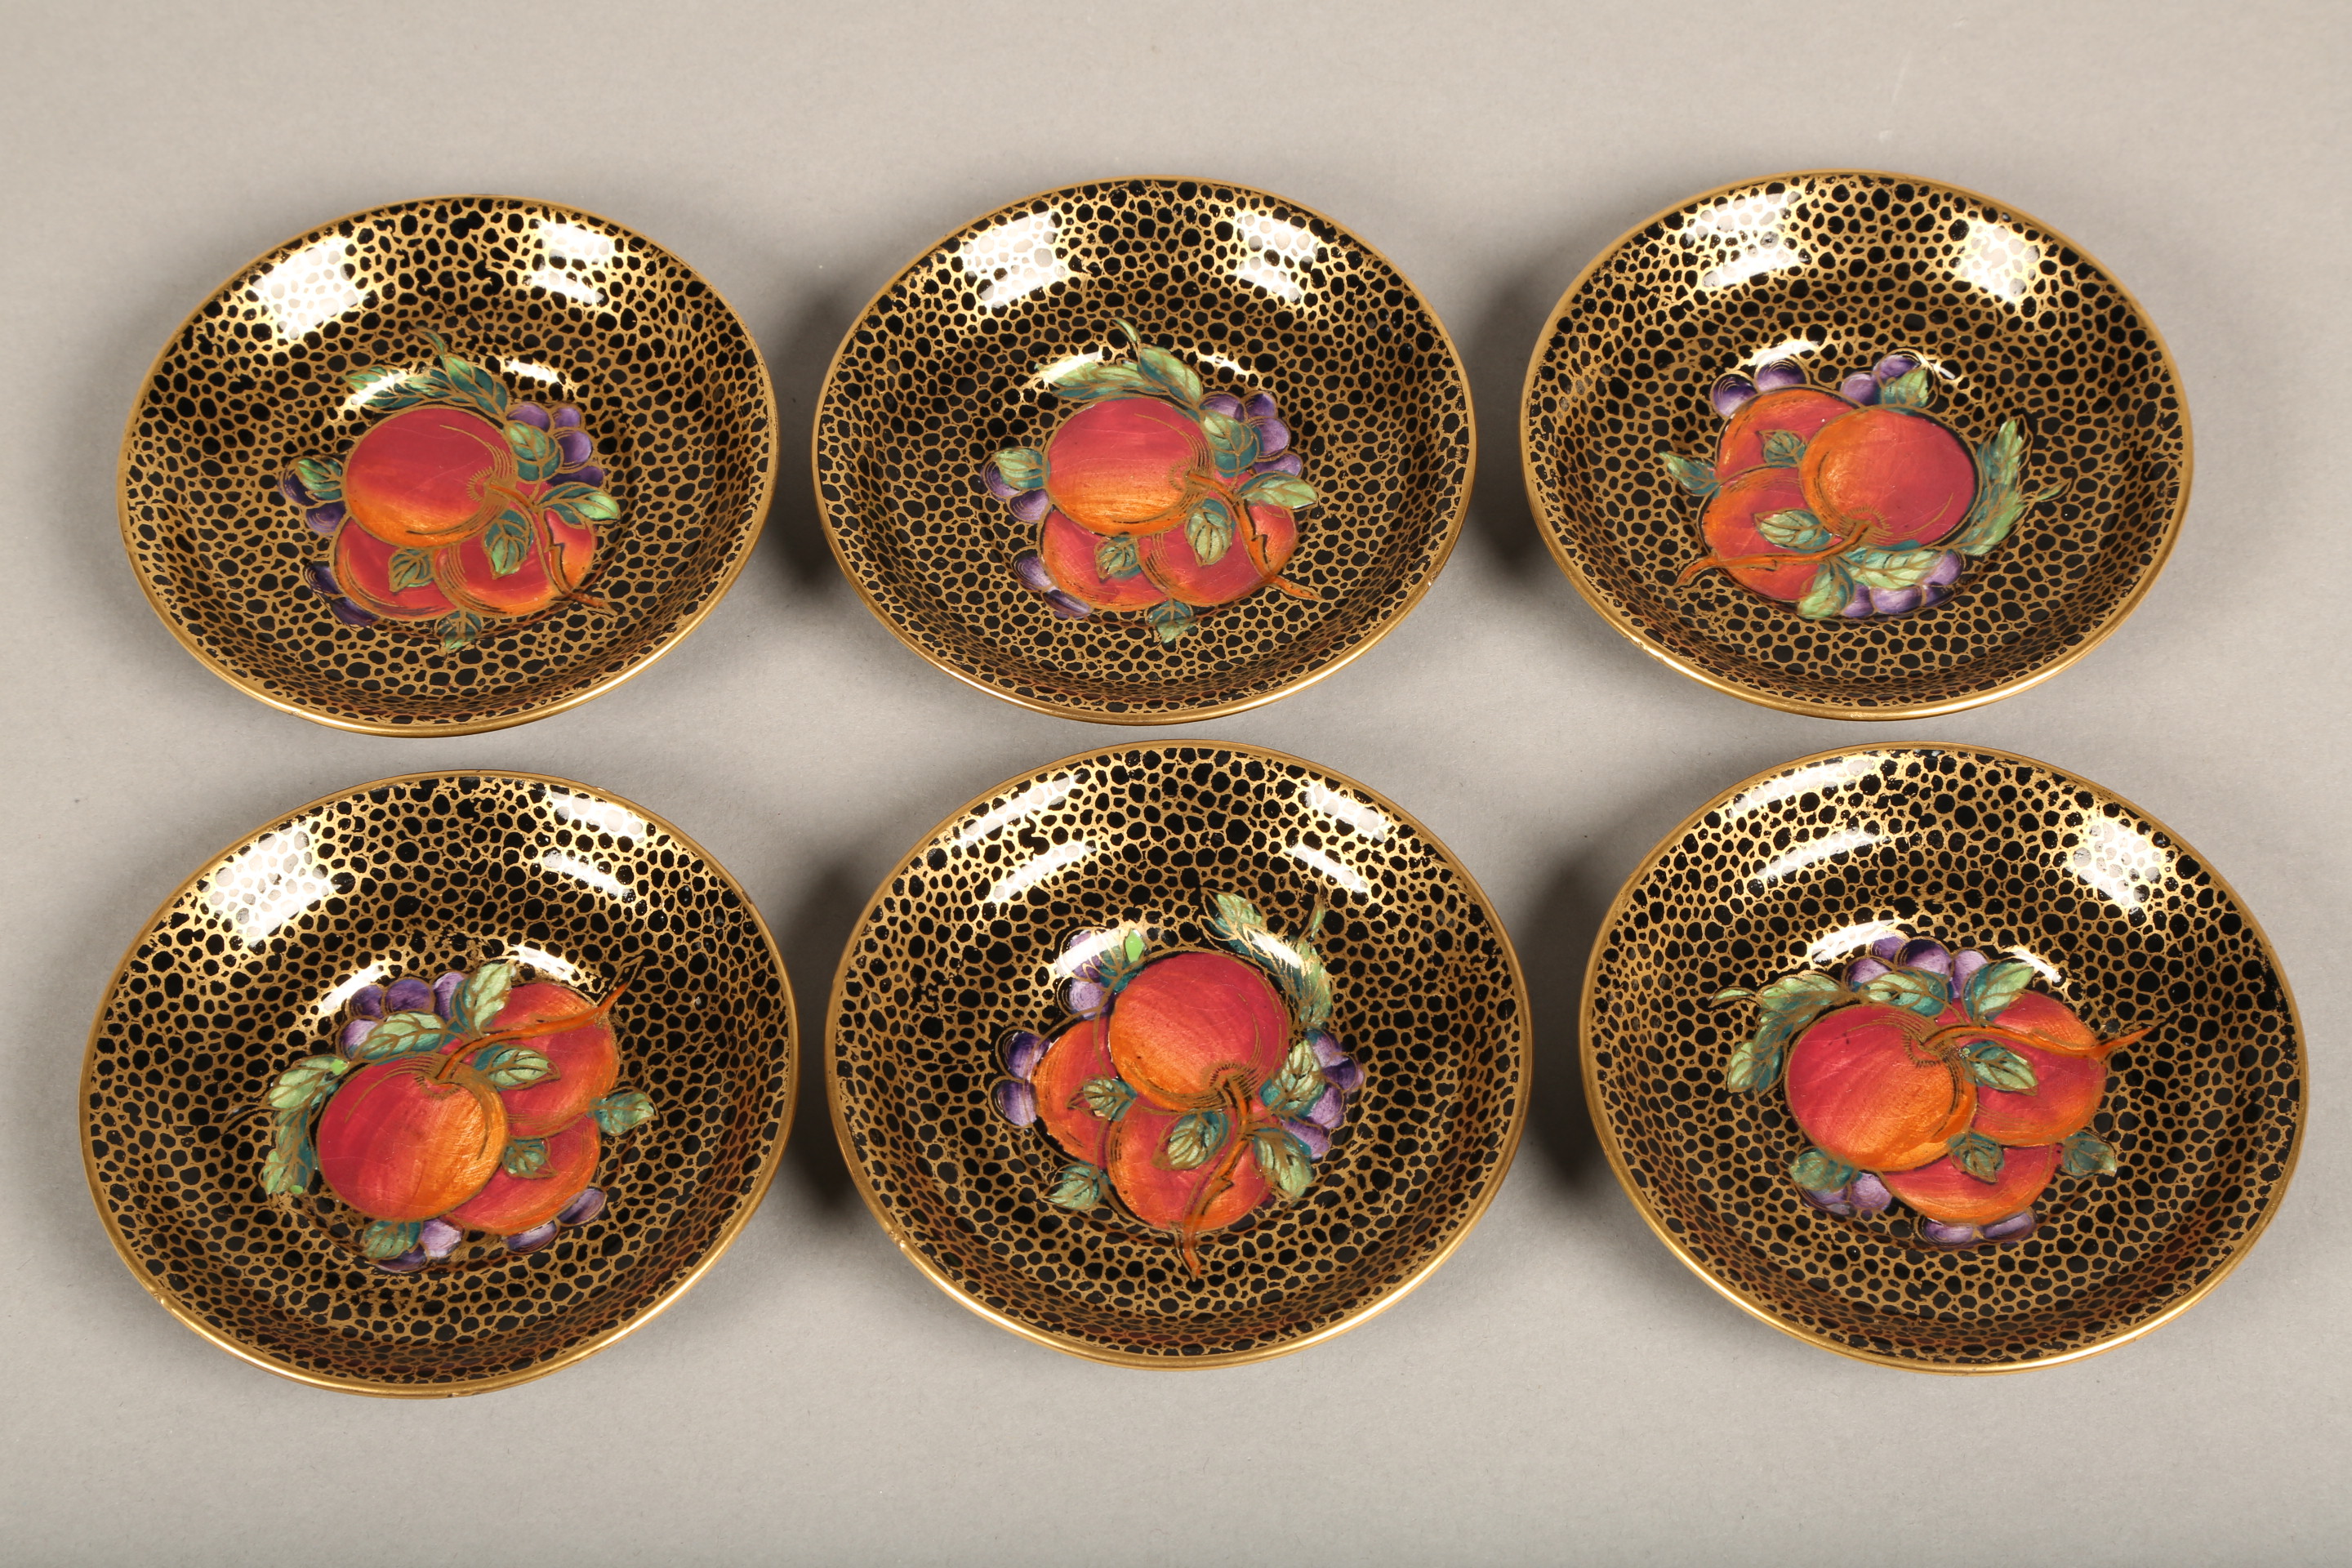 Fifteen piece Maling lustre coffee set, plum and berry, pattern 3615, gilt interiors and handles. - Image 5 of 7